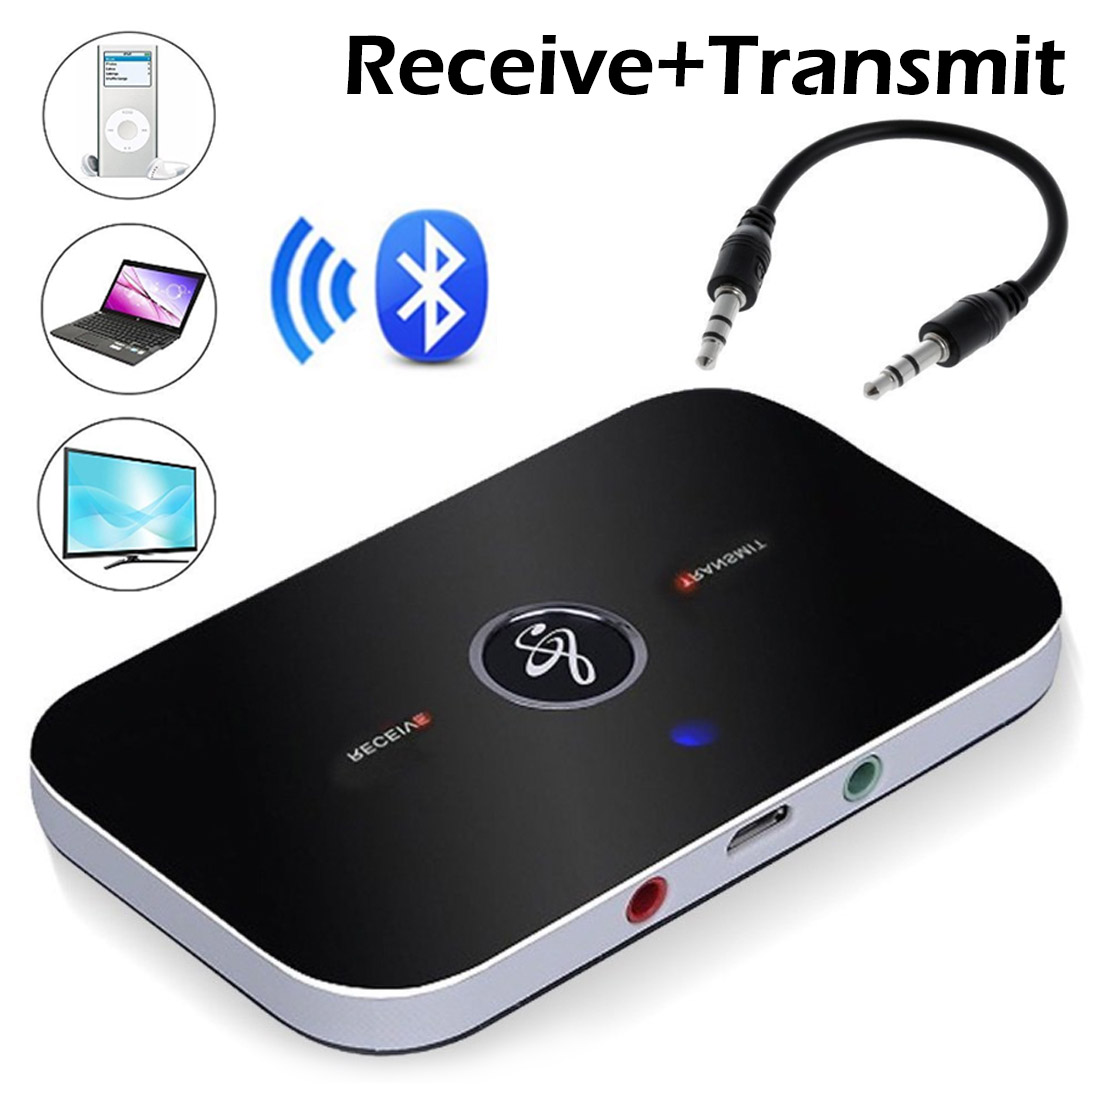 Wireless Bluetooth Transmitter Stereo Audio Adapter Receive for TV Phone PC 